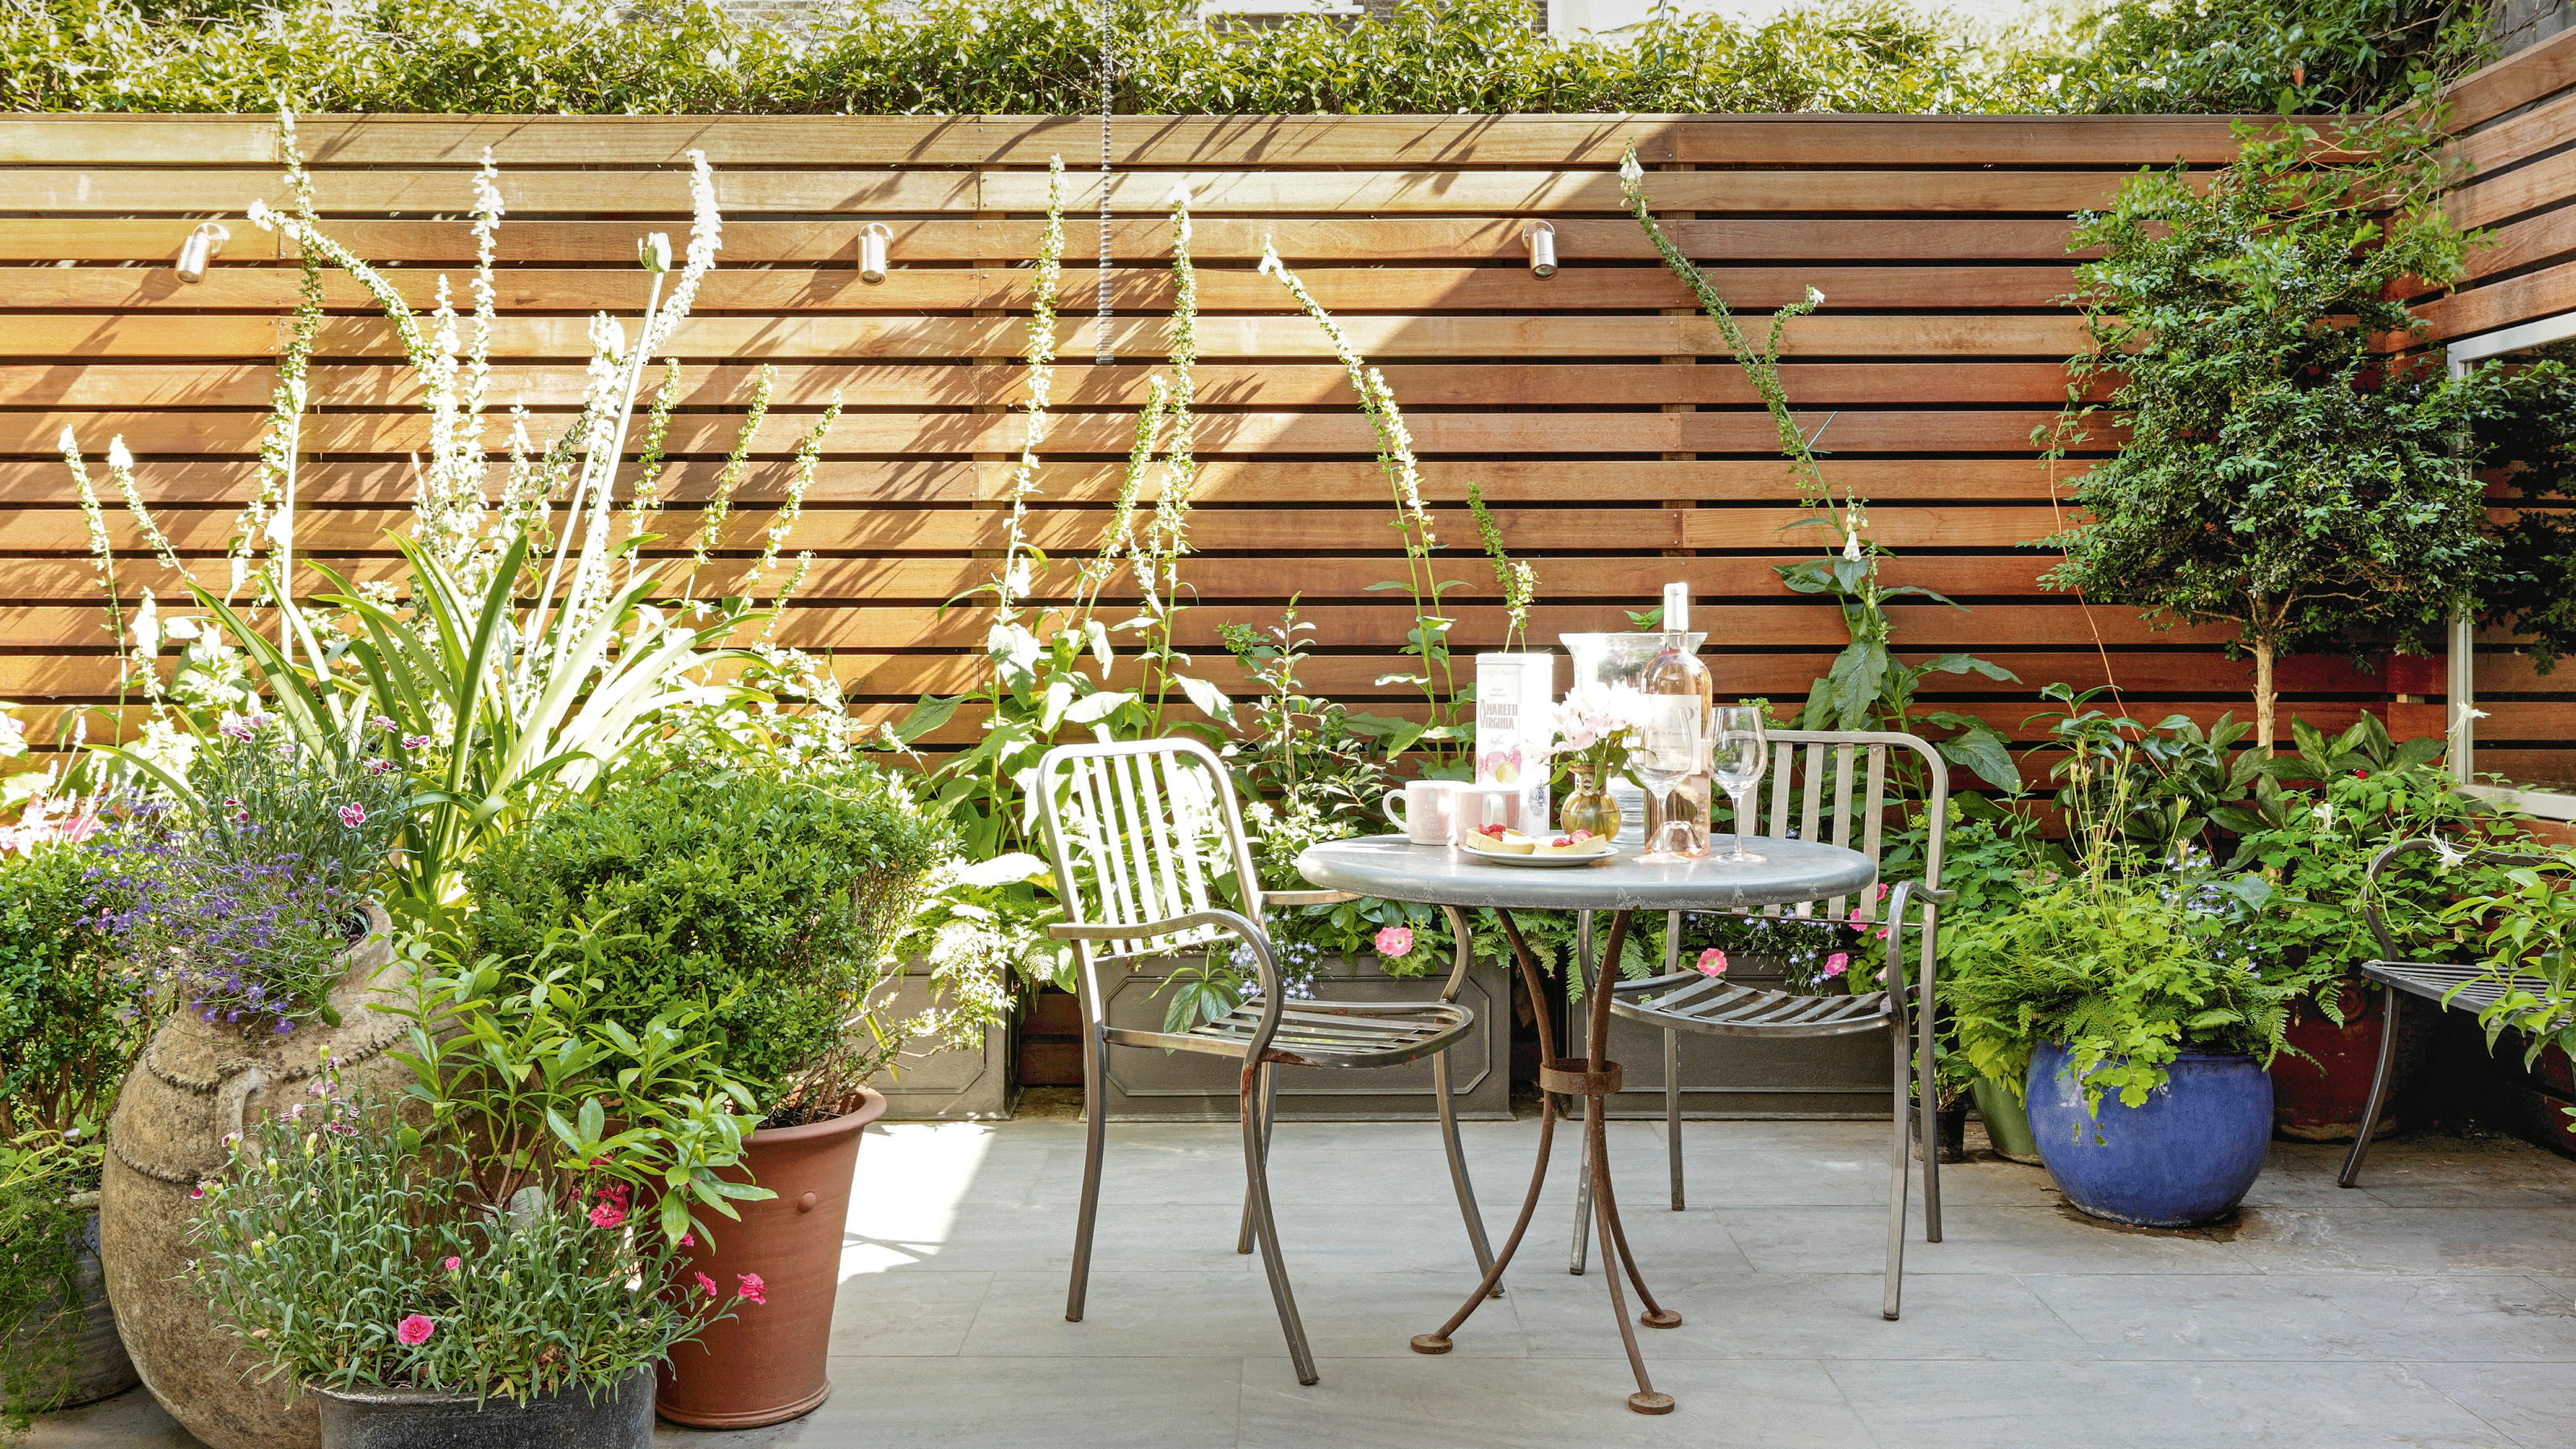 Table and chairs laid for a meal on a gravel area beside raised beds with shrubs and flowers. 